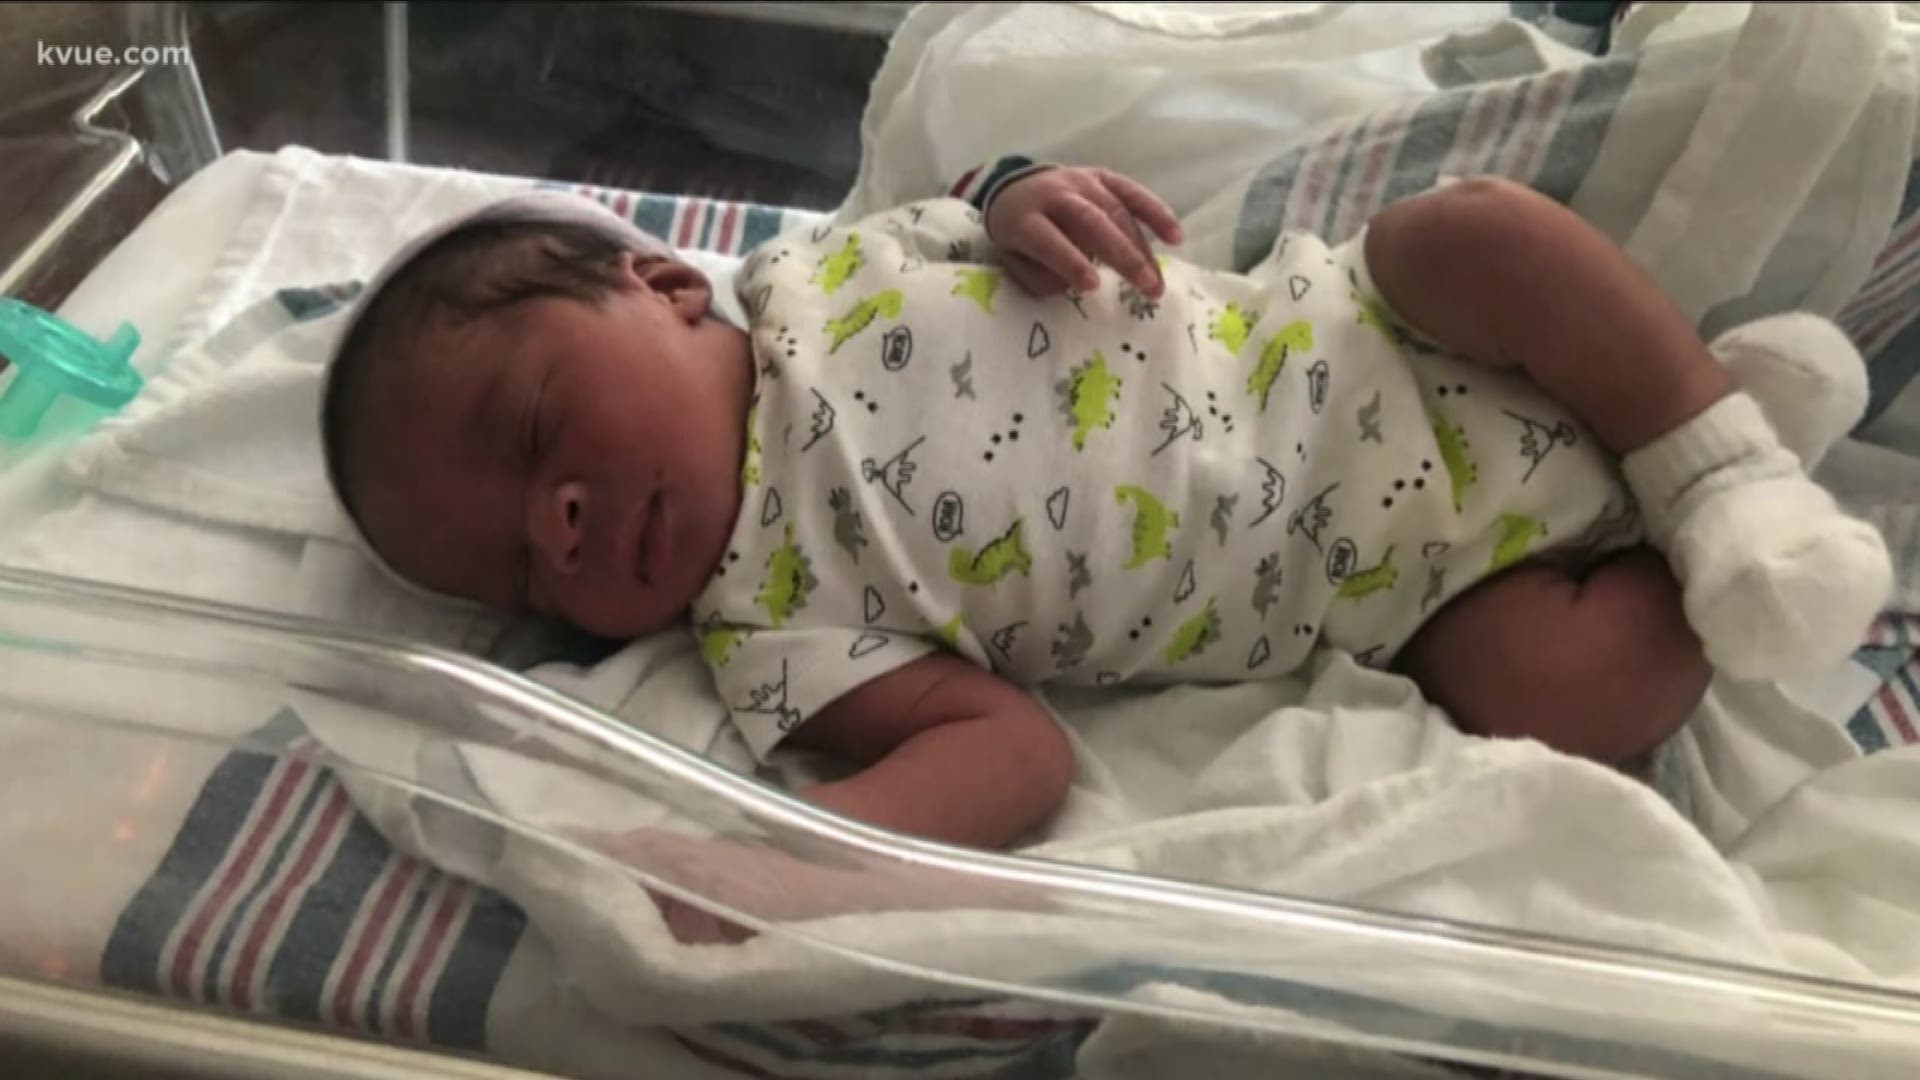 A missing 1-month-old baby has been found safe.